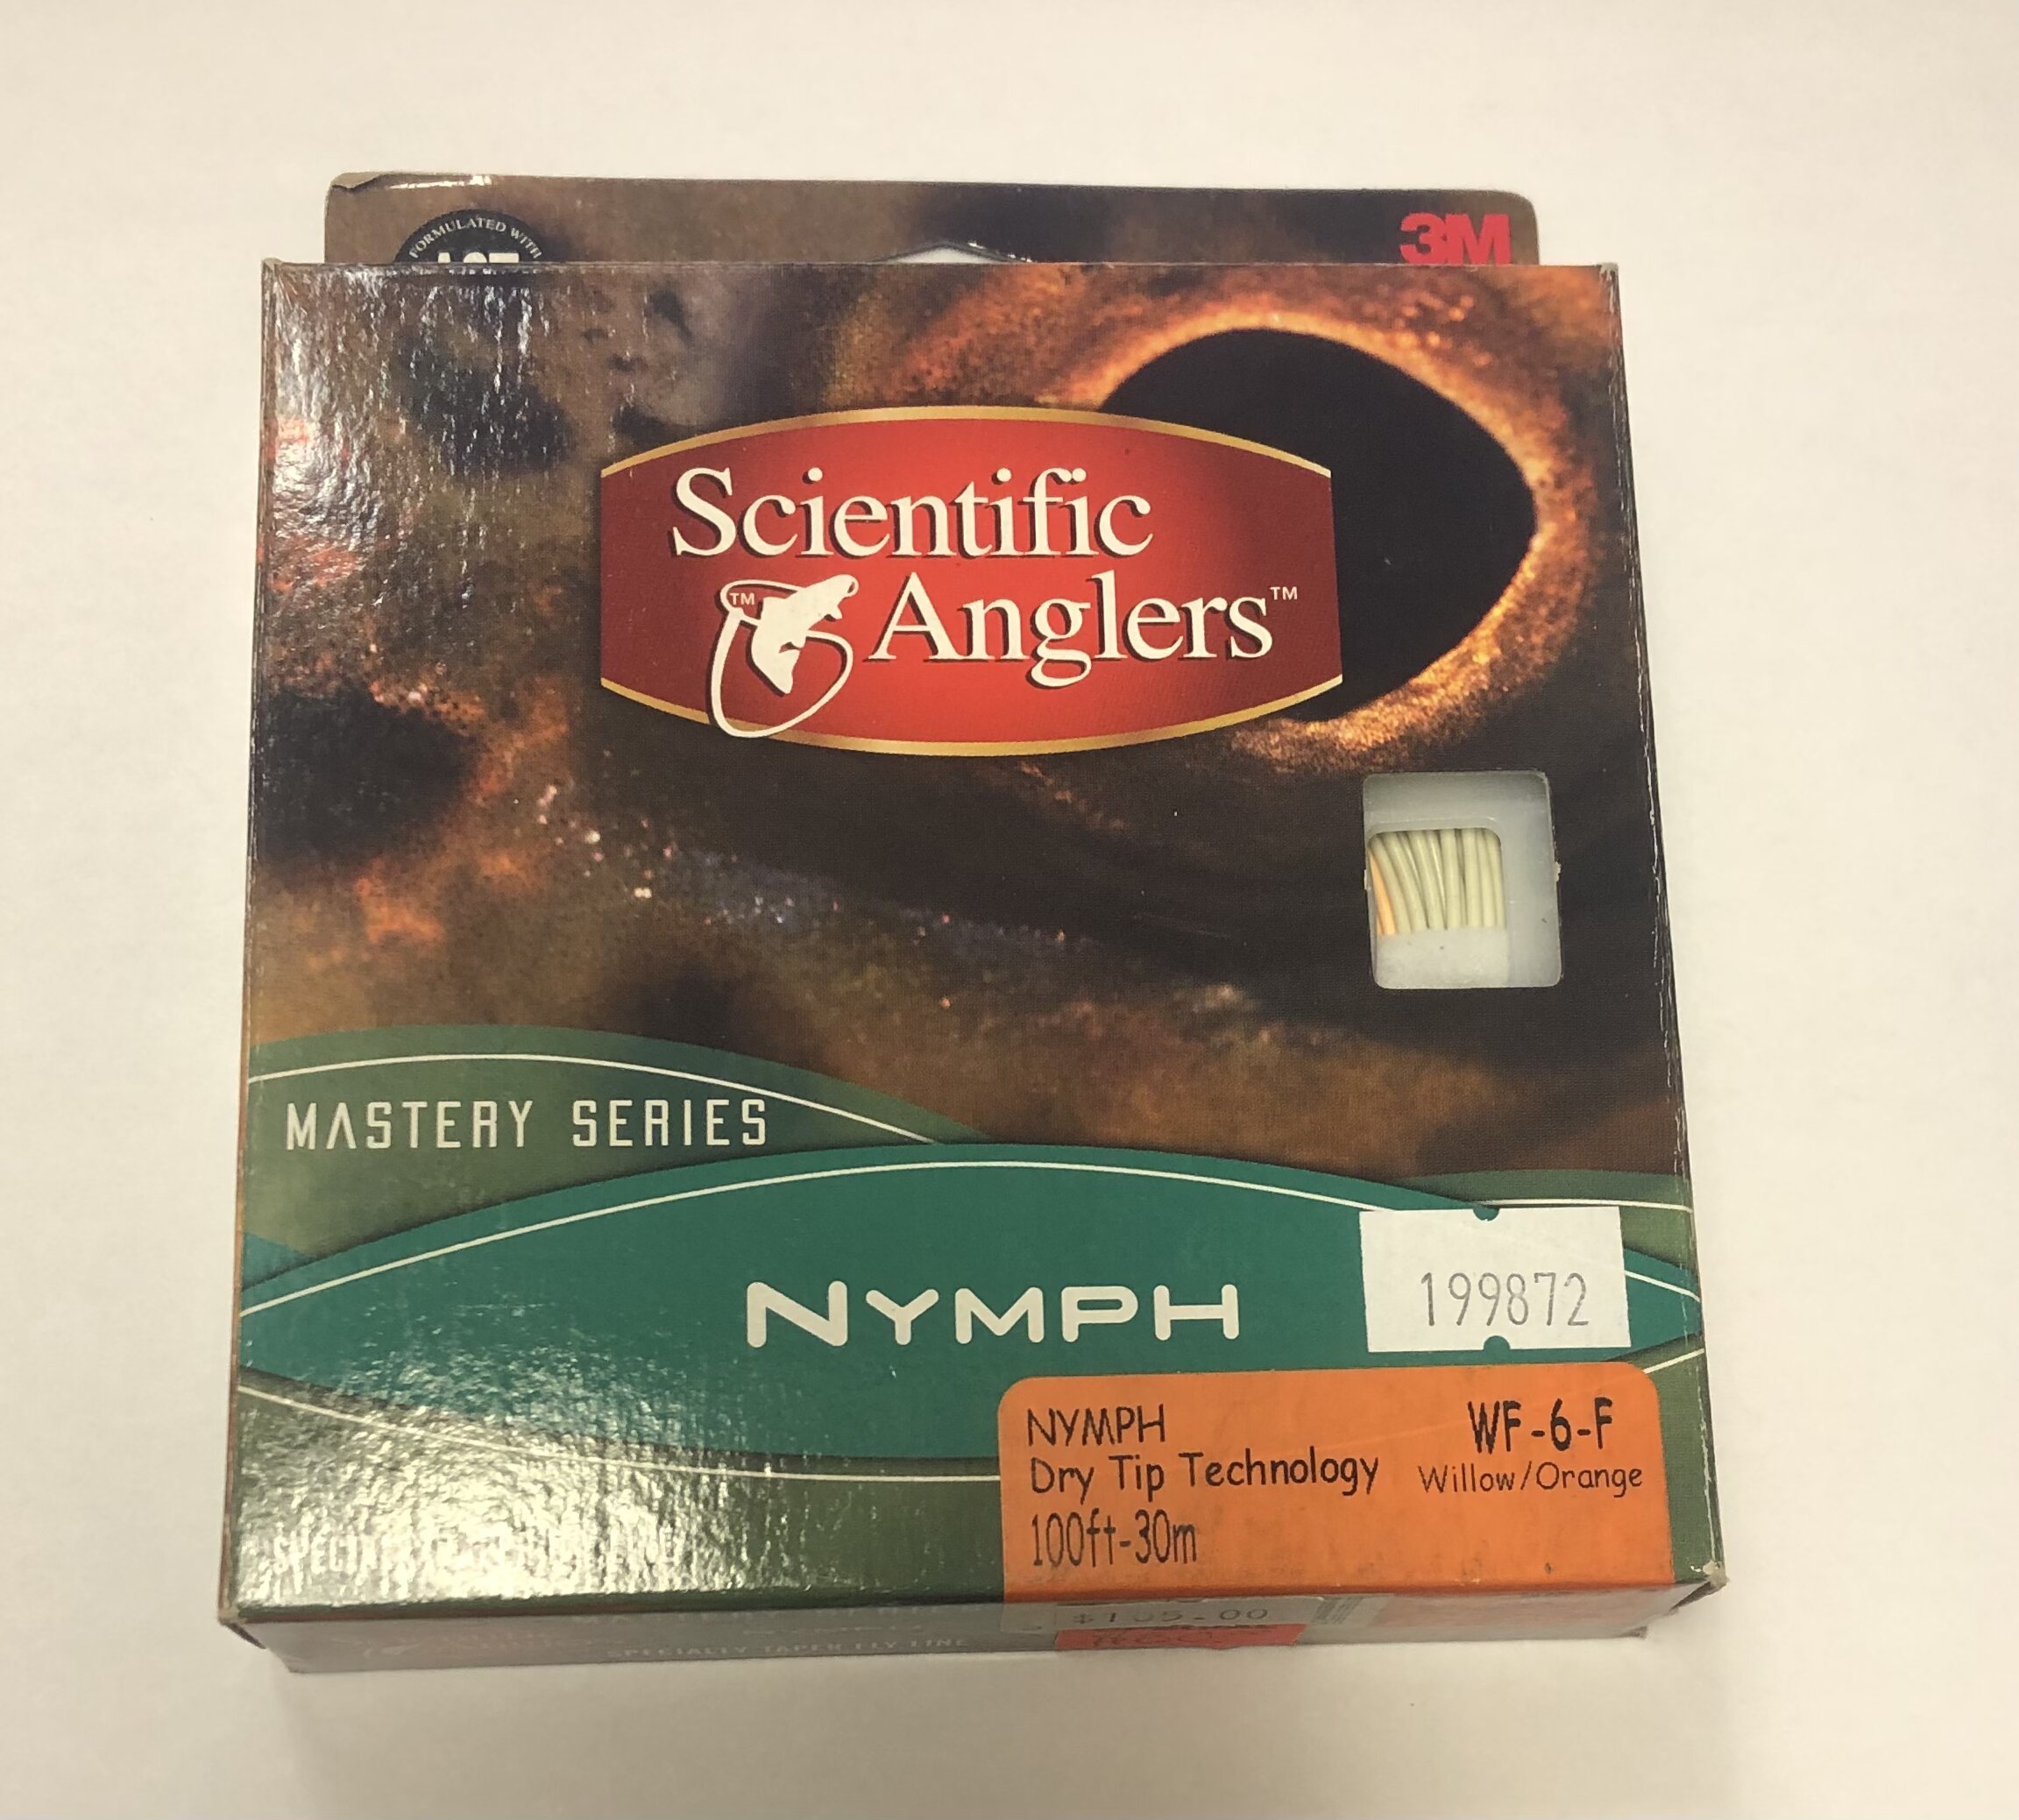 Scientific Anglers Mastery Nymph - WF6F